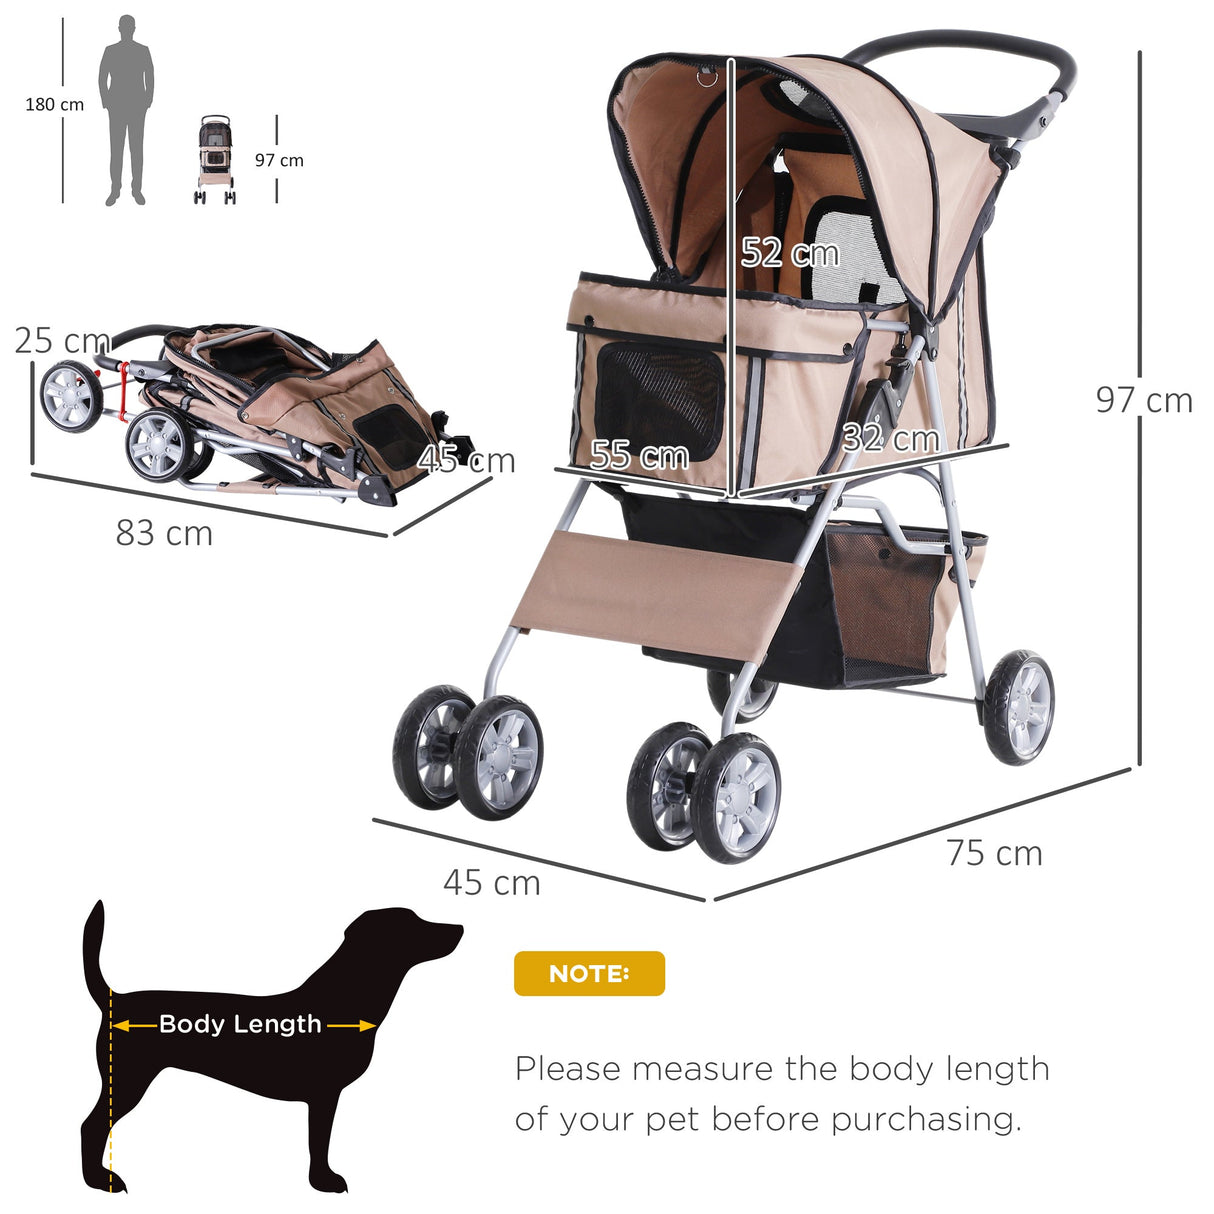 Dog Pushchair for Small Miniature Dogs Cats Foldable Travel Carriage with Wheels Zipper Entry Cup Holder Storage Basket, PawHut, Brown